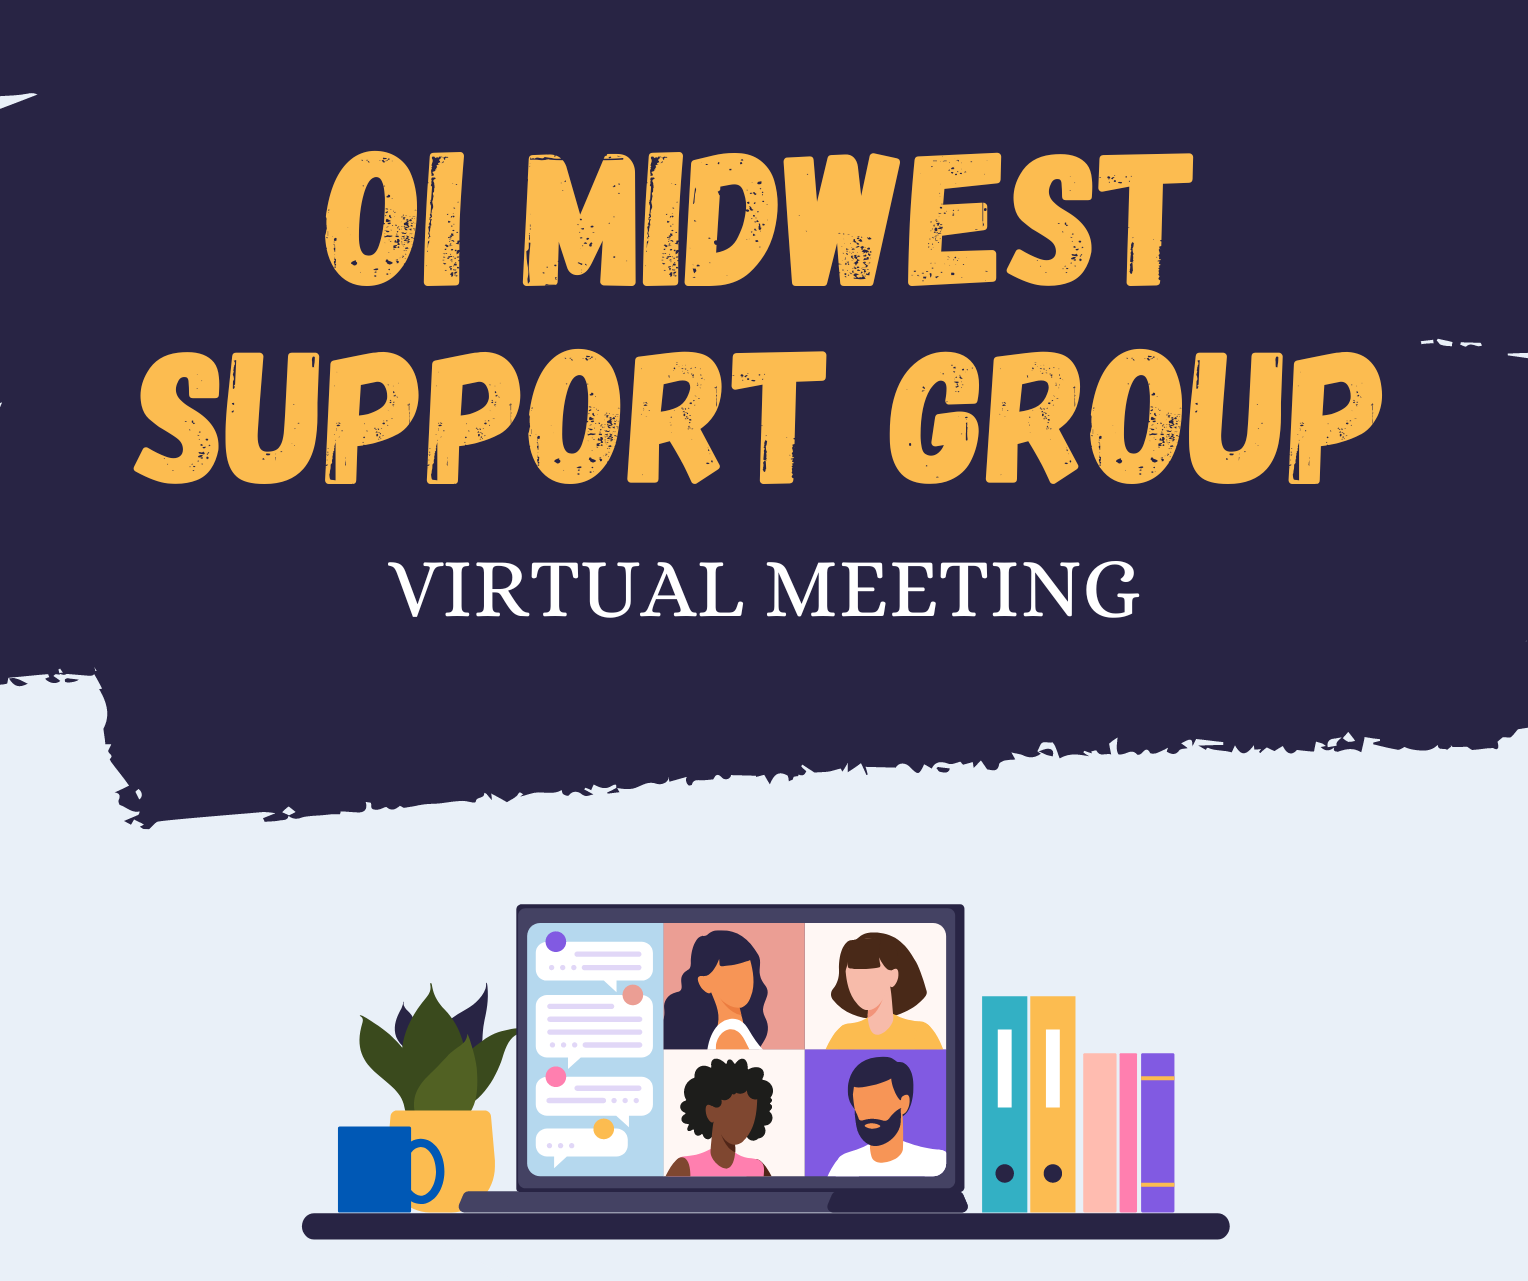 Midwest OI Support Group Meeting